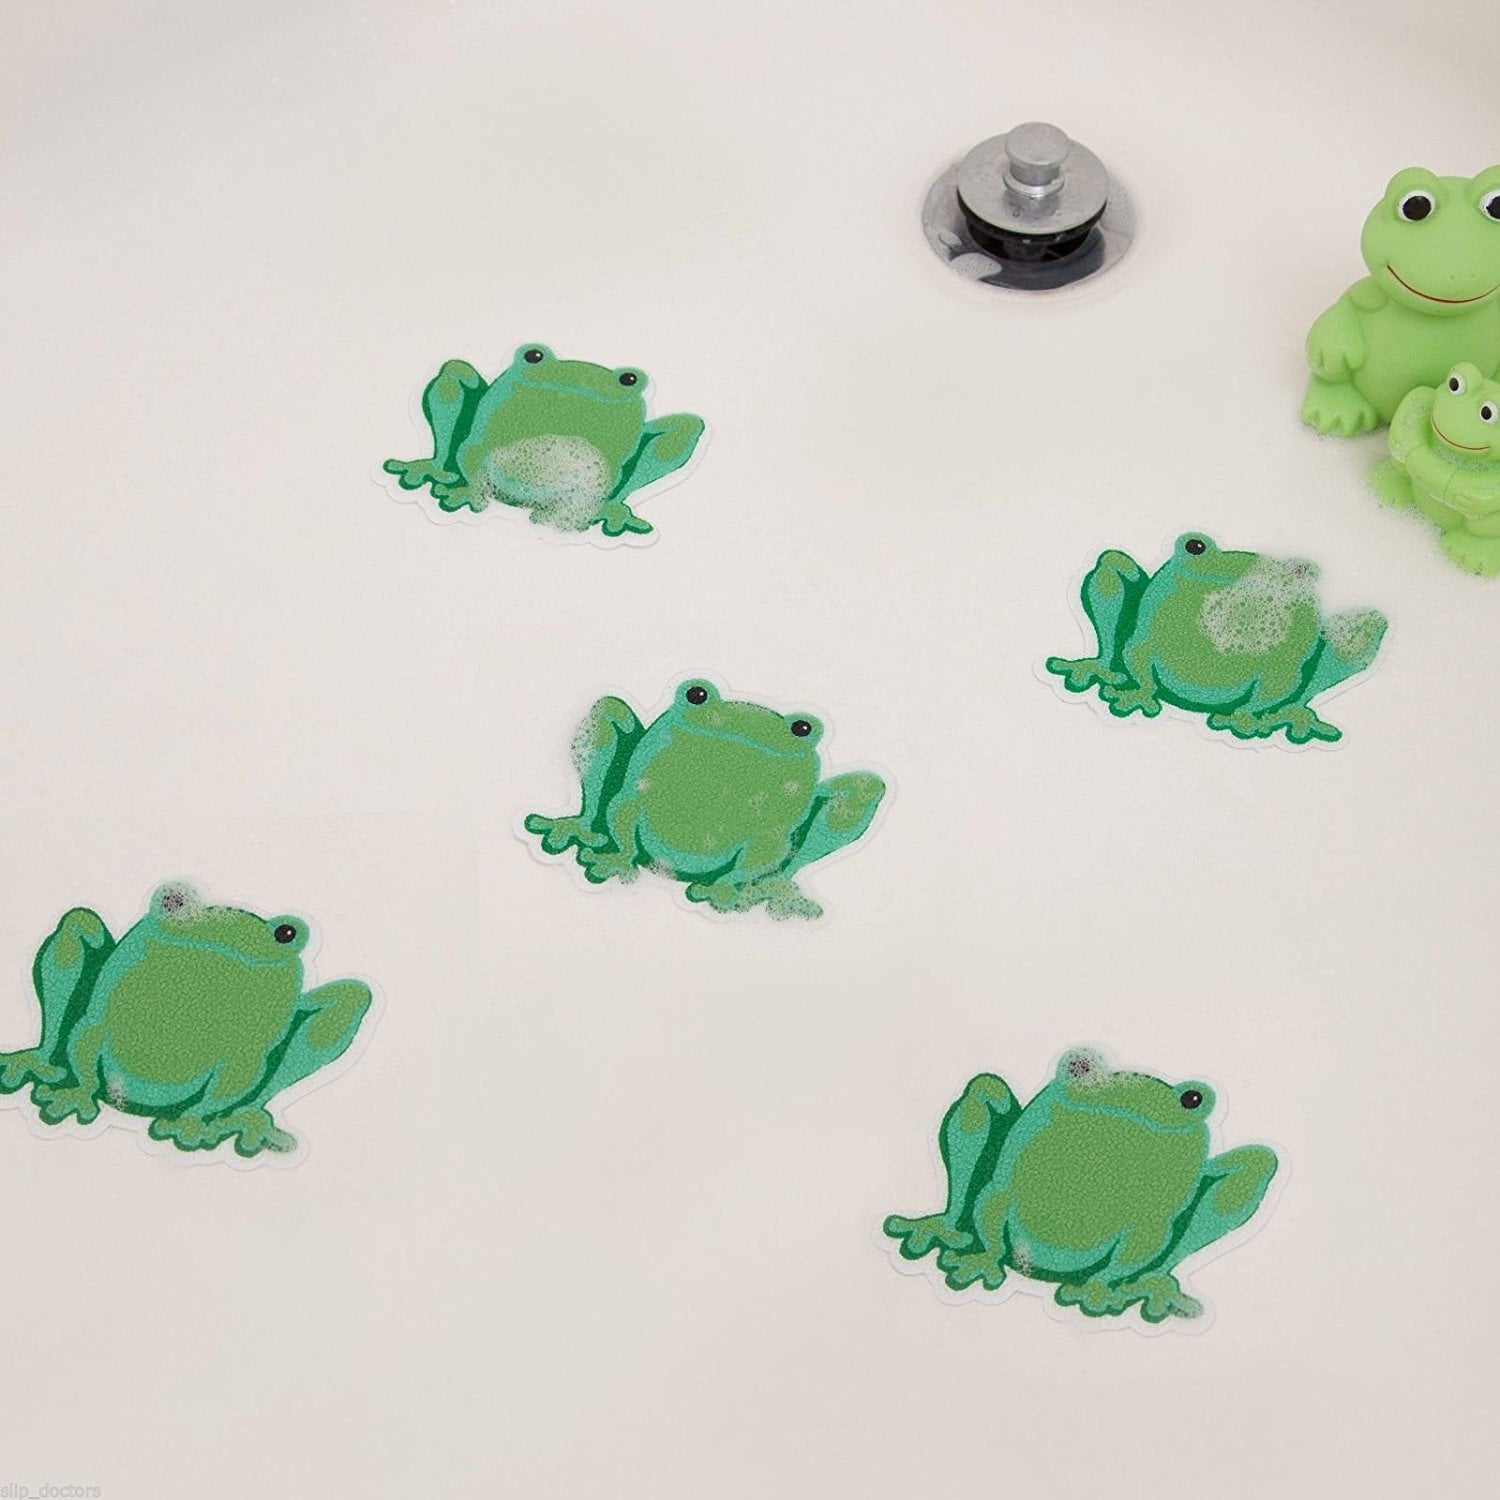 Anti Slip Tread Decal Sticker Tape Shower Mat Frog large 10" or Extra large 20" 